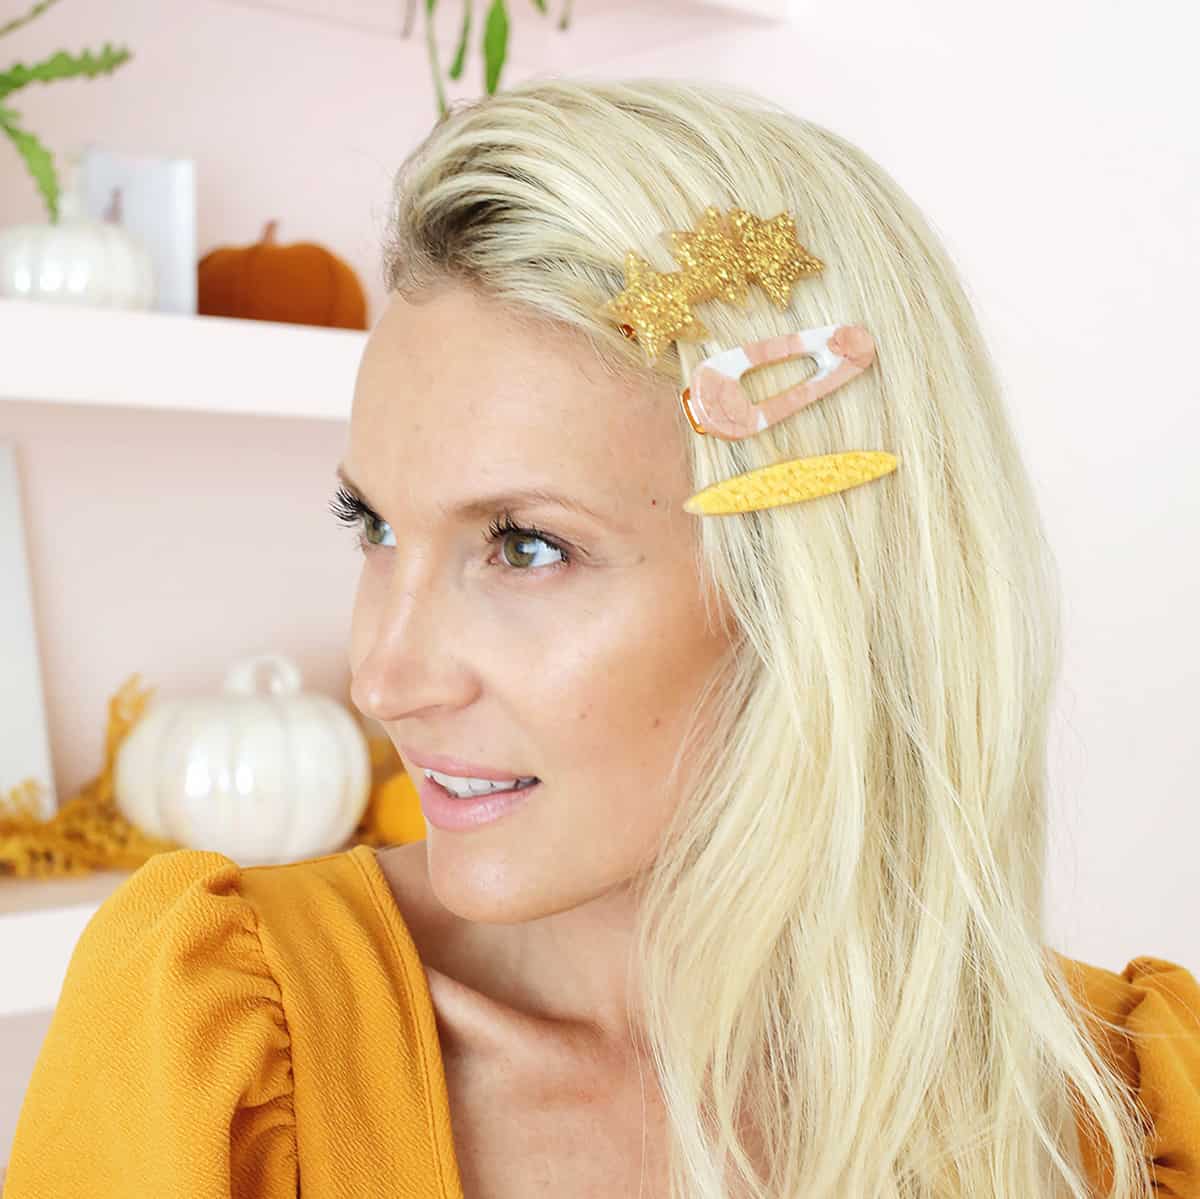 https://abeautifulmess.com/wp-content/uploads/2021/09/How-To-Make-Statement-Hair-Clips-At-Home-click-through-for-tutorial-1-16.jpg